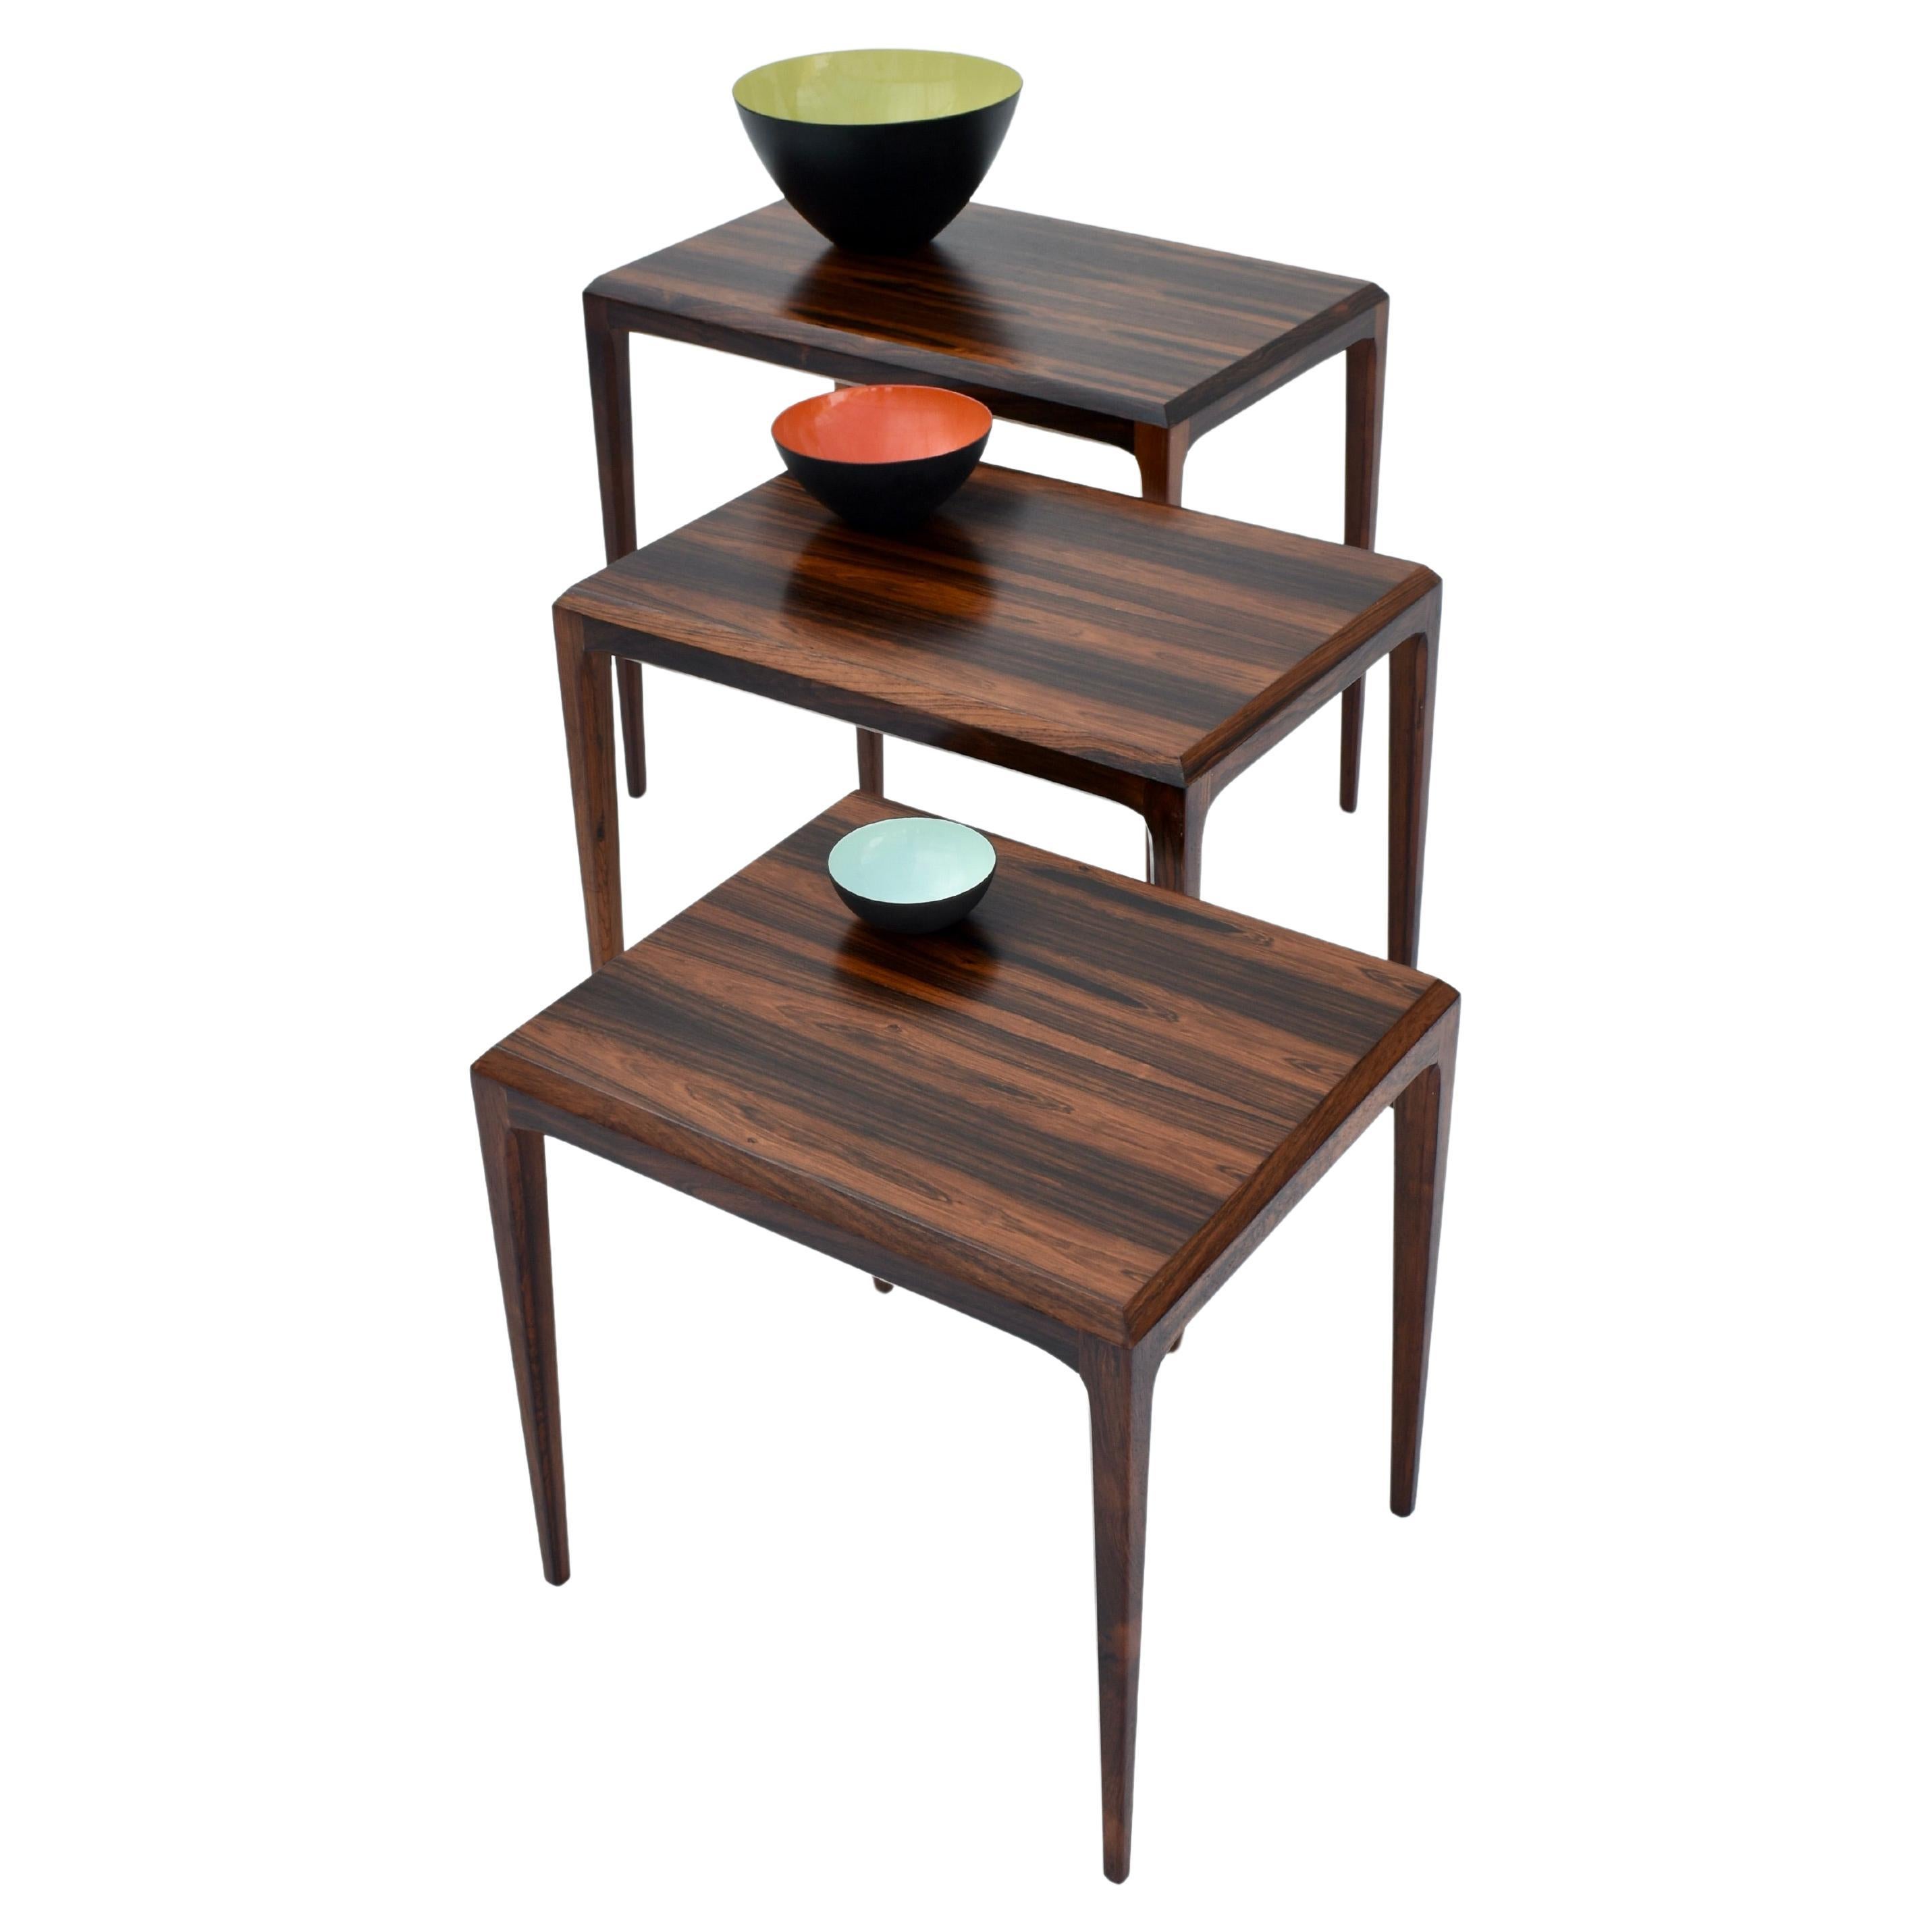 Midcentury Danish Set Of 3 Rosewood Nesting Tables BY Johannes Andersen For CFC